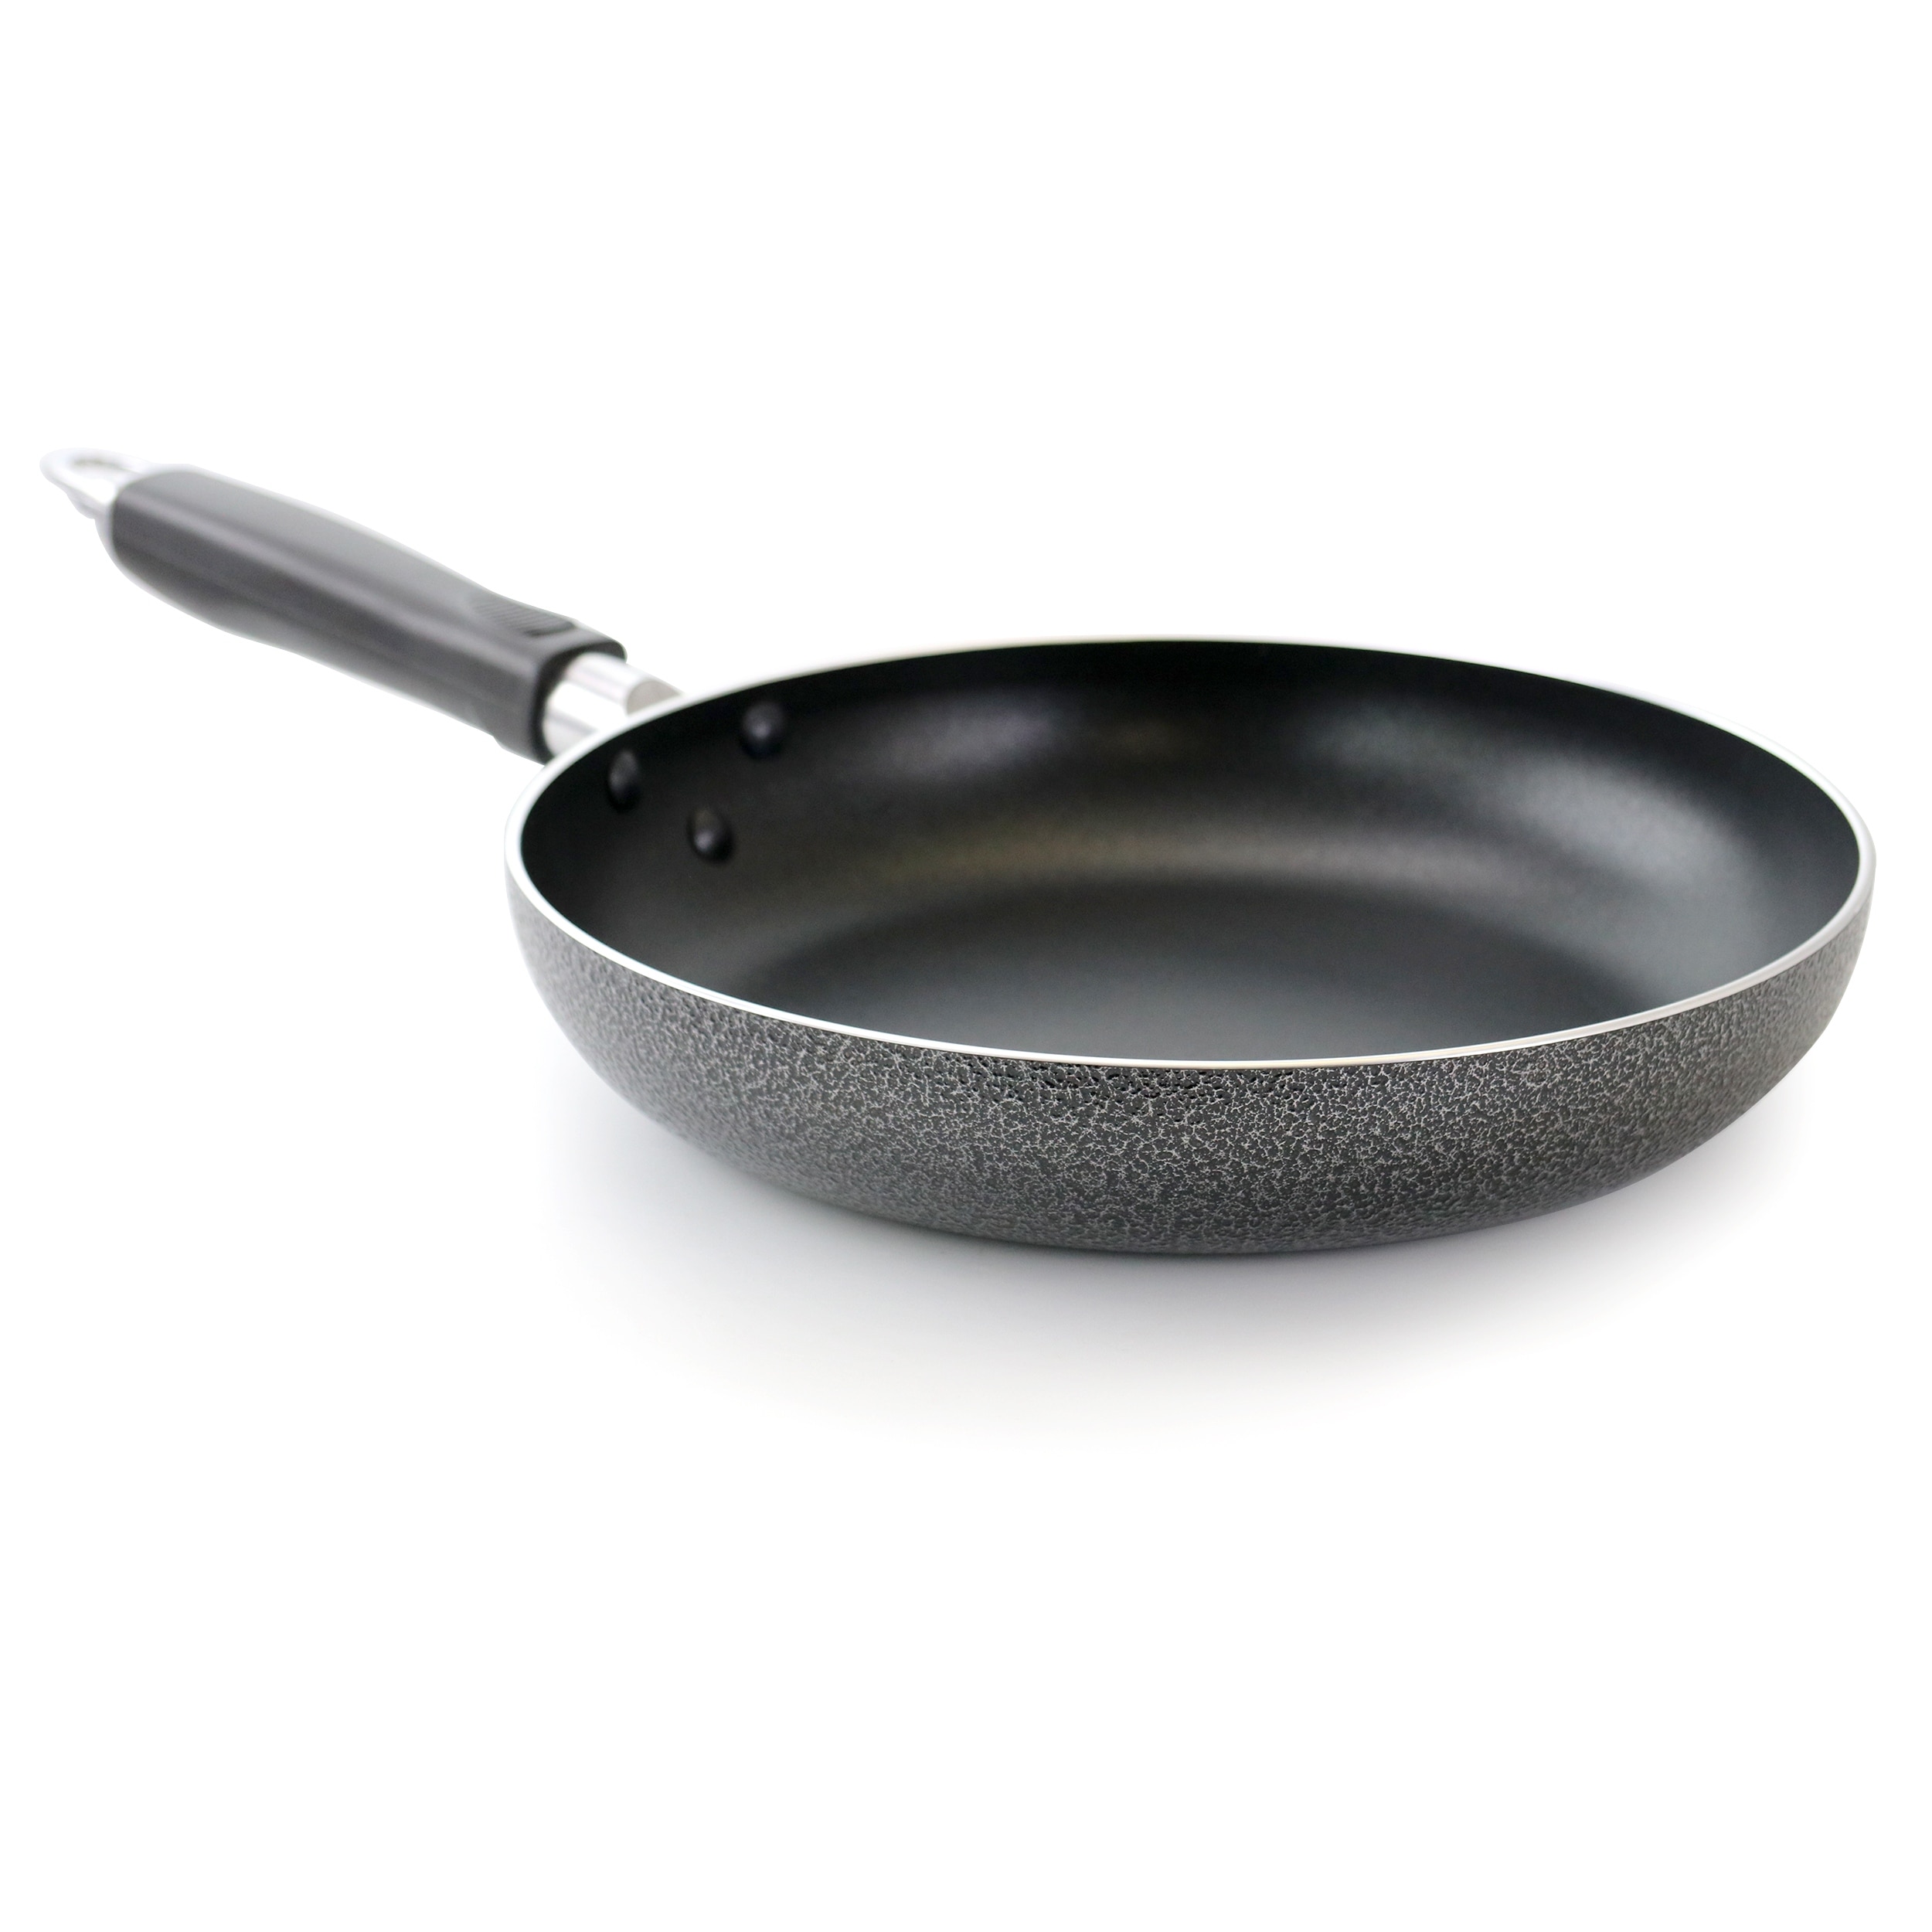 https://ak1.ostkcdn.com/images/products/is/images/direct/8758fa82046a461e0fdc88ca56ee2c6360492a3d/Better-Chef-8-Inch-Aluminum-Fry-Pan-F800.jpg